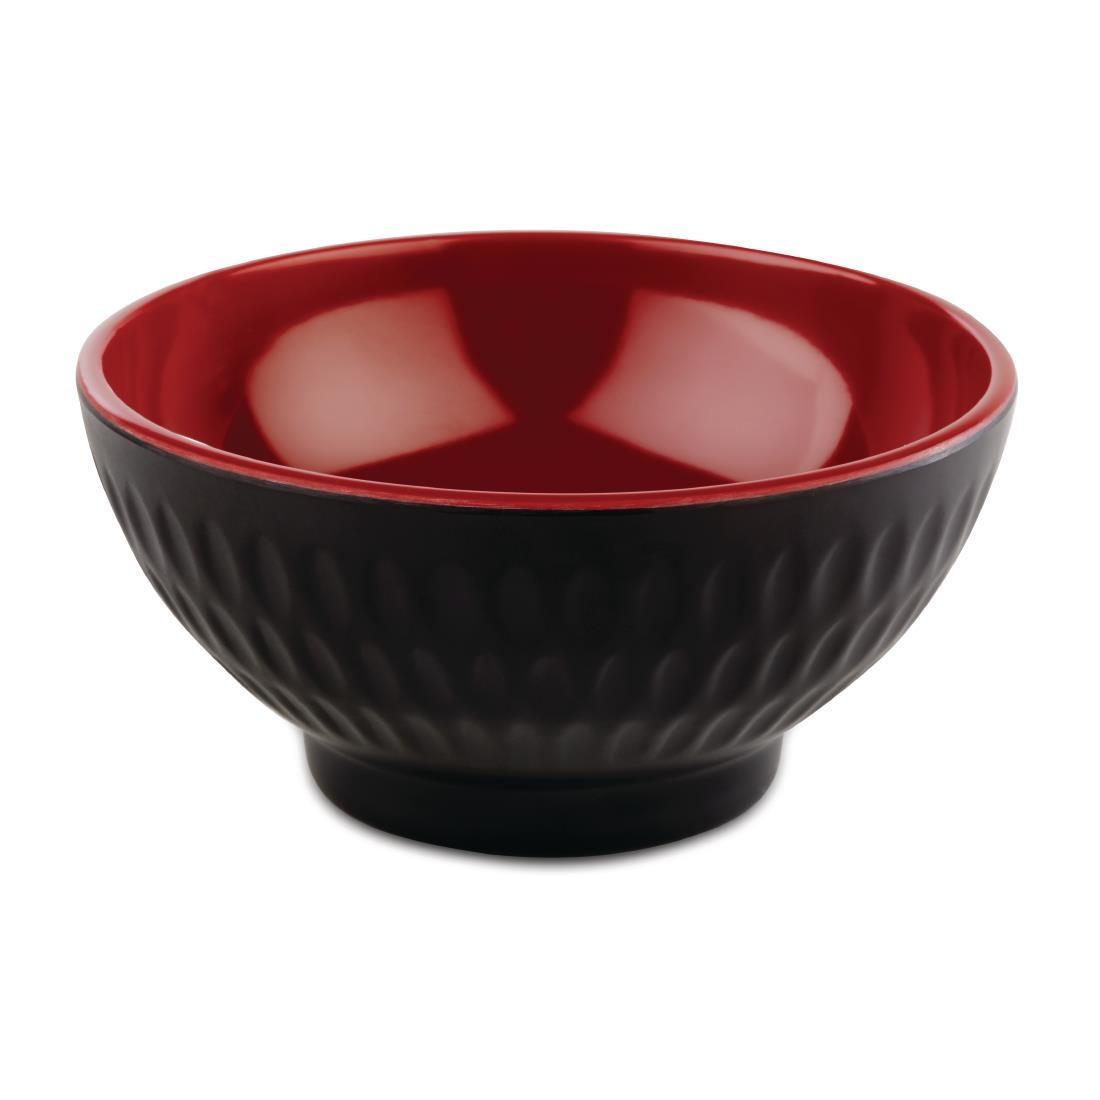 APS Asia+ Bowl Red 95mm - Each - DW018 - 1